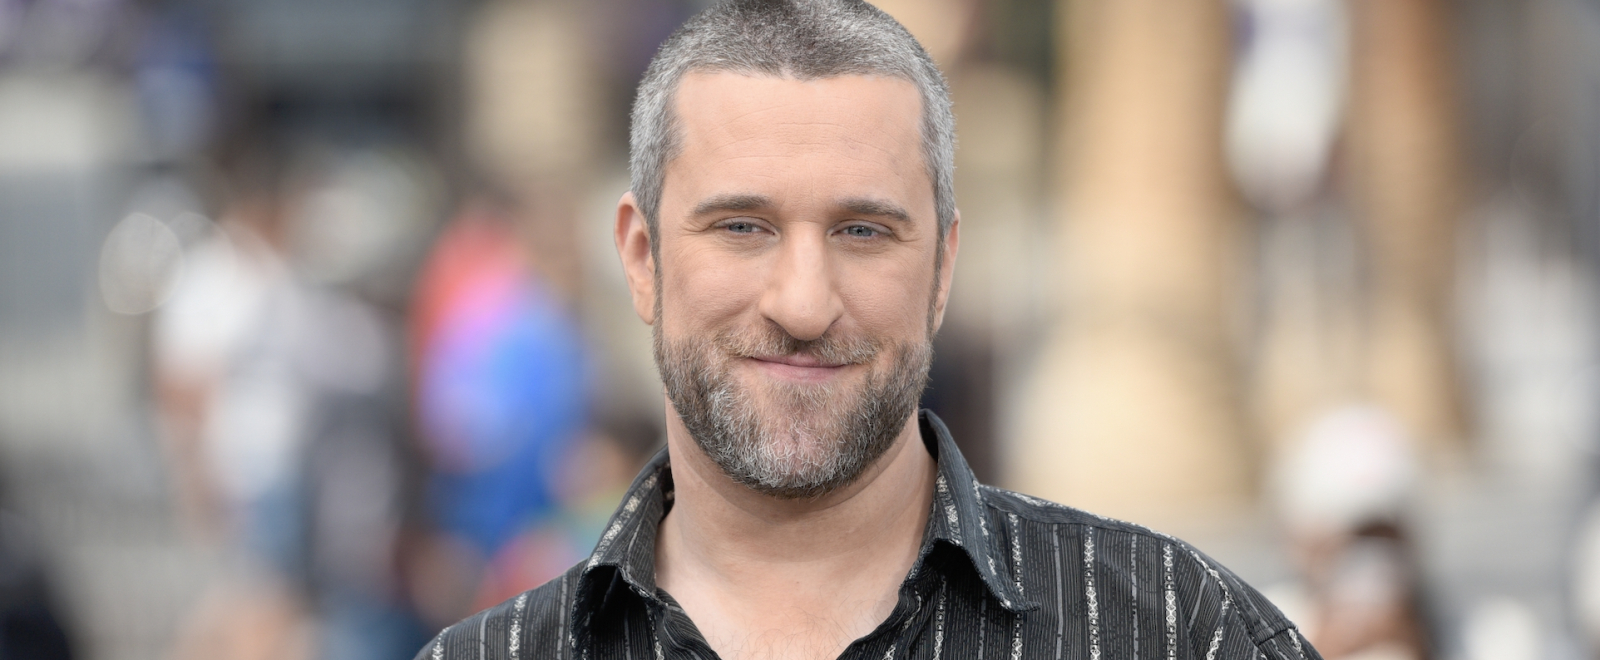 ‘Saved By The Bell’ Star Dustin Diamond Is Dead At 44